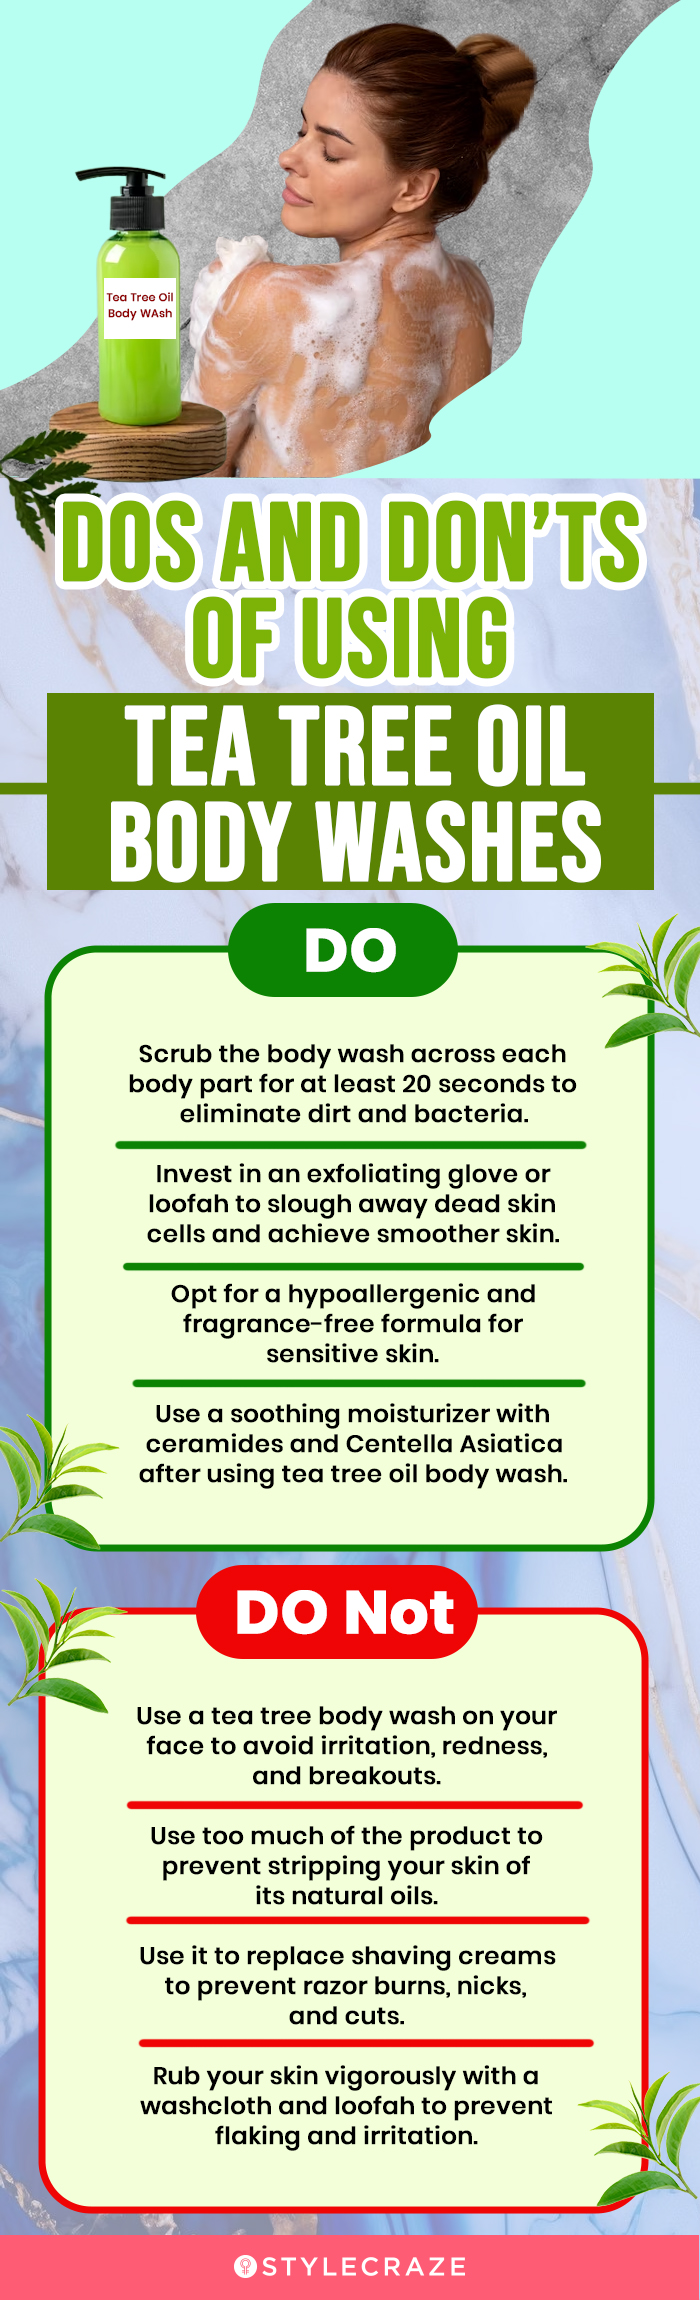 Dos And Don’ts Of Using Tea Tree Oil Body Washes (infographic)